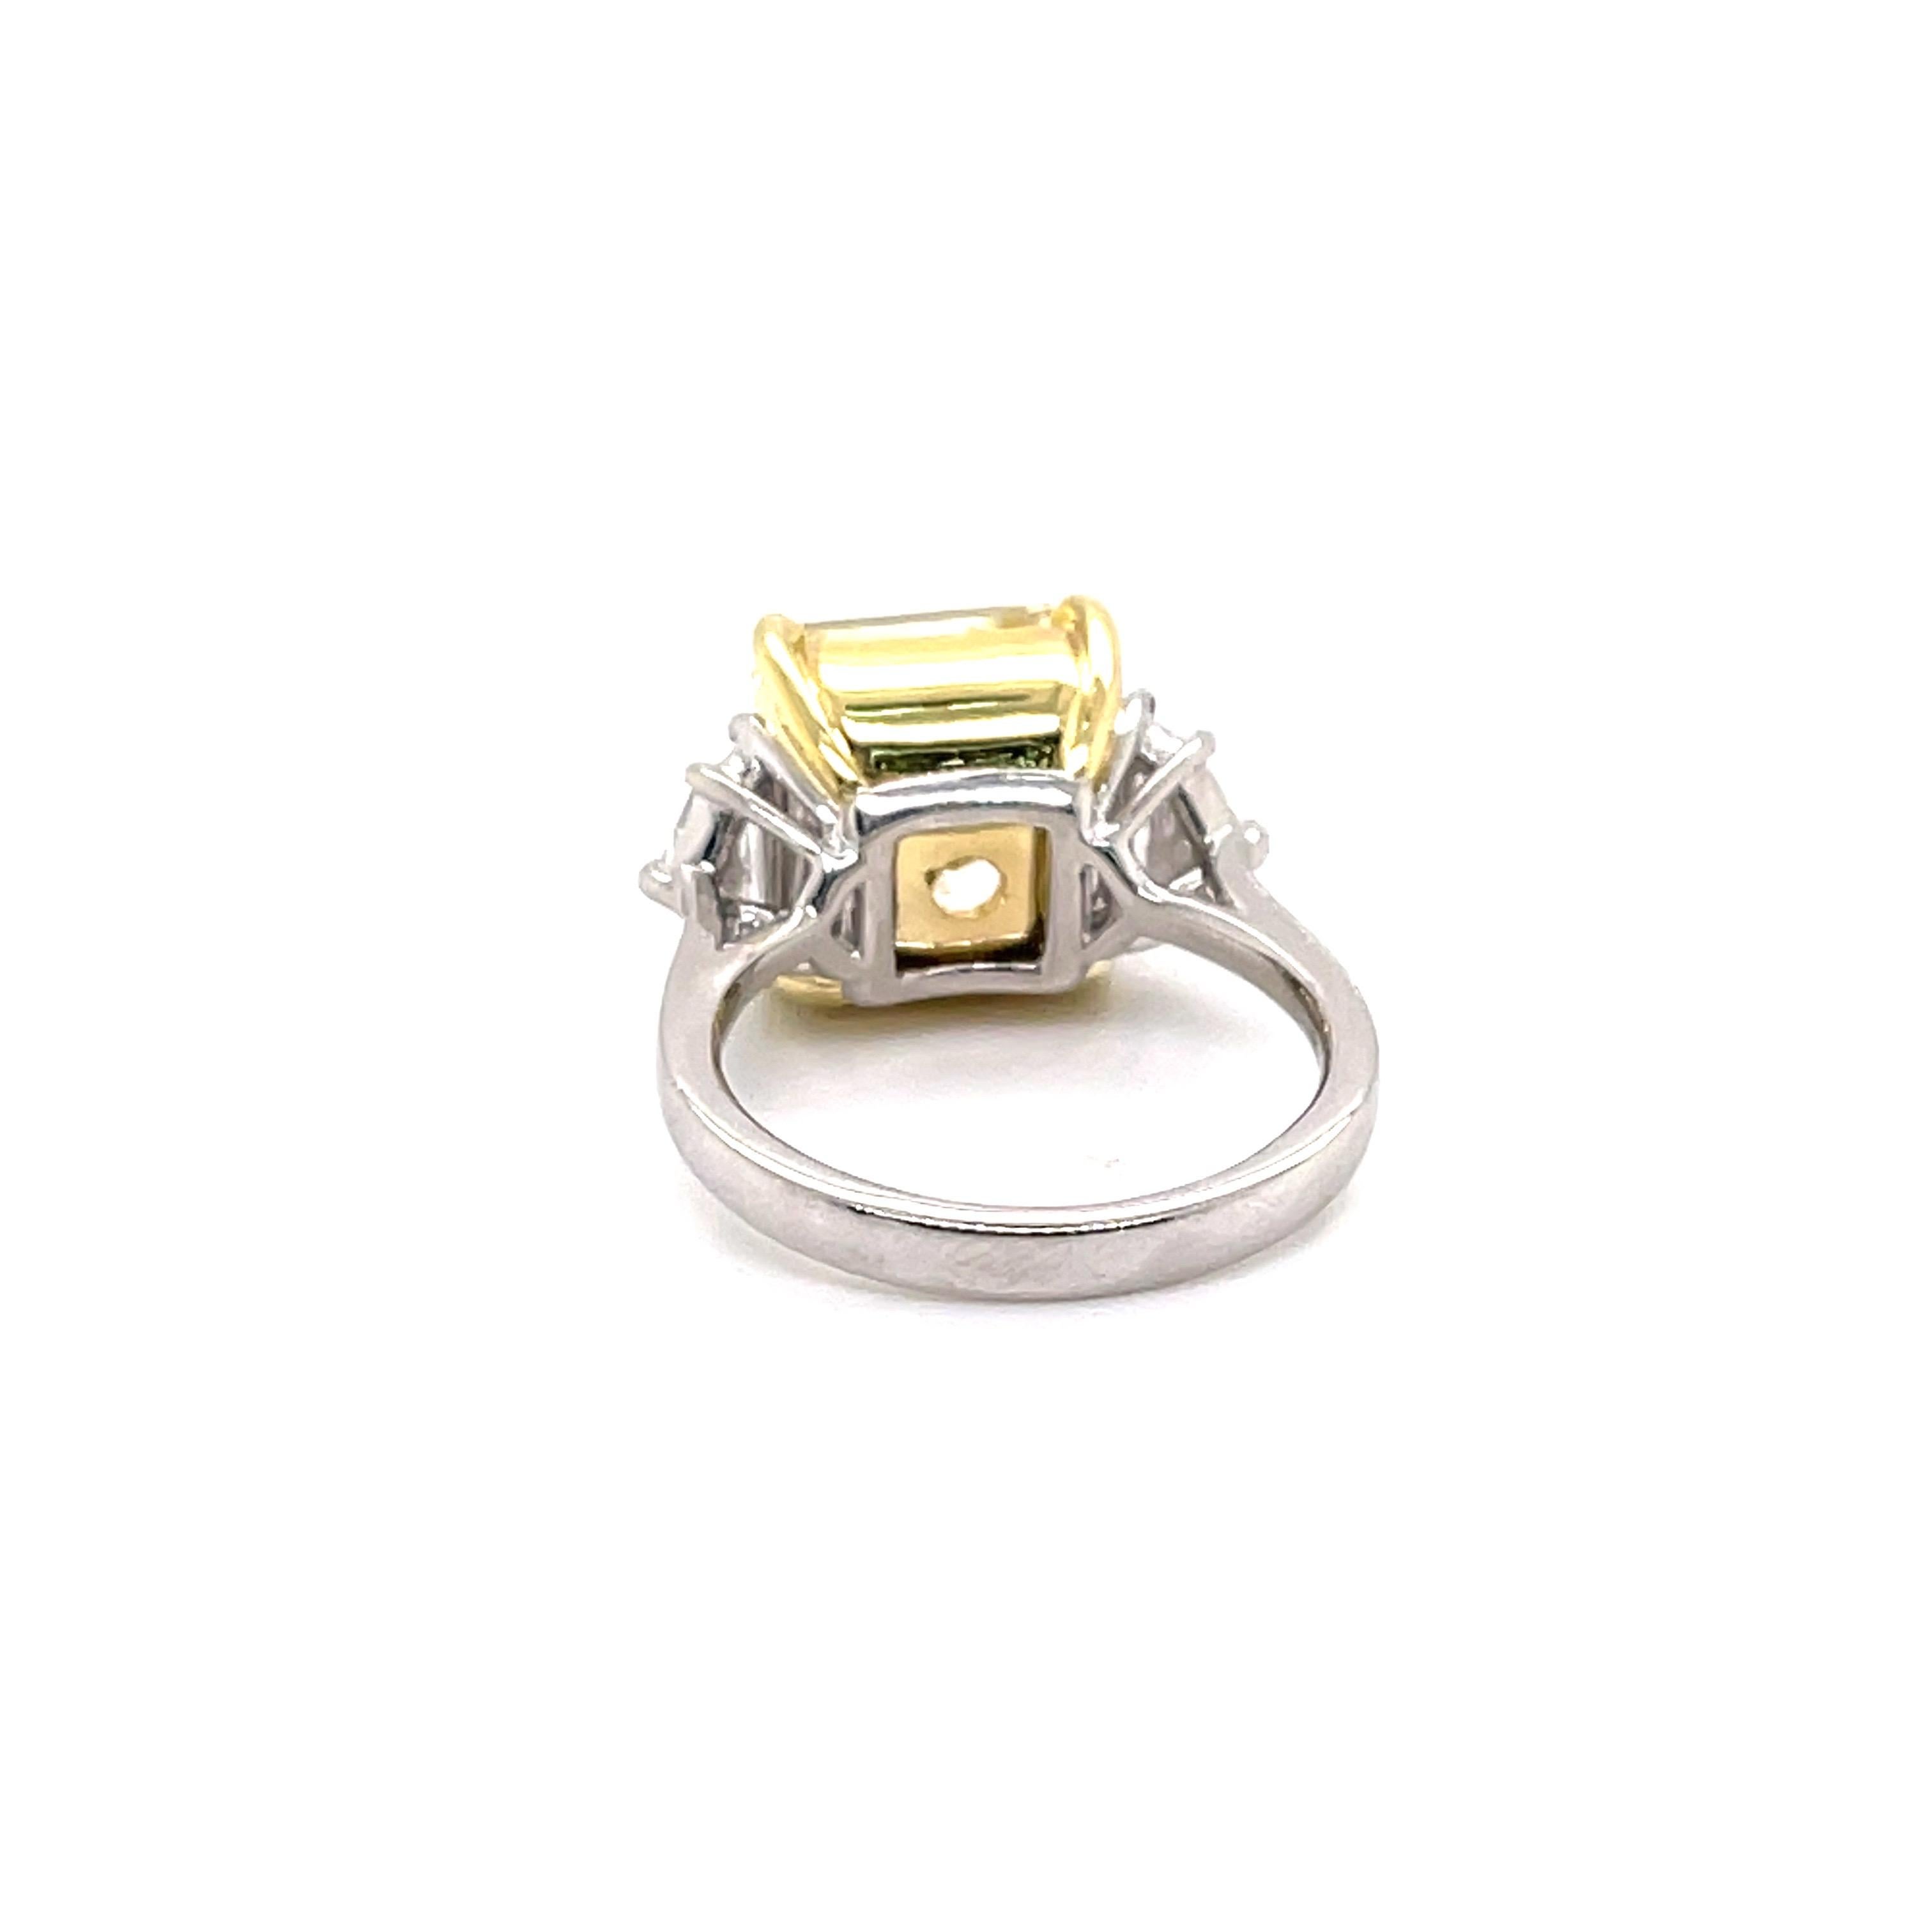 Contemporary Radiant Fancy Yellow Cocktail Ring 7.46 Carats GIA For Sale